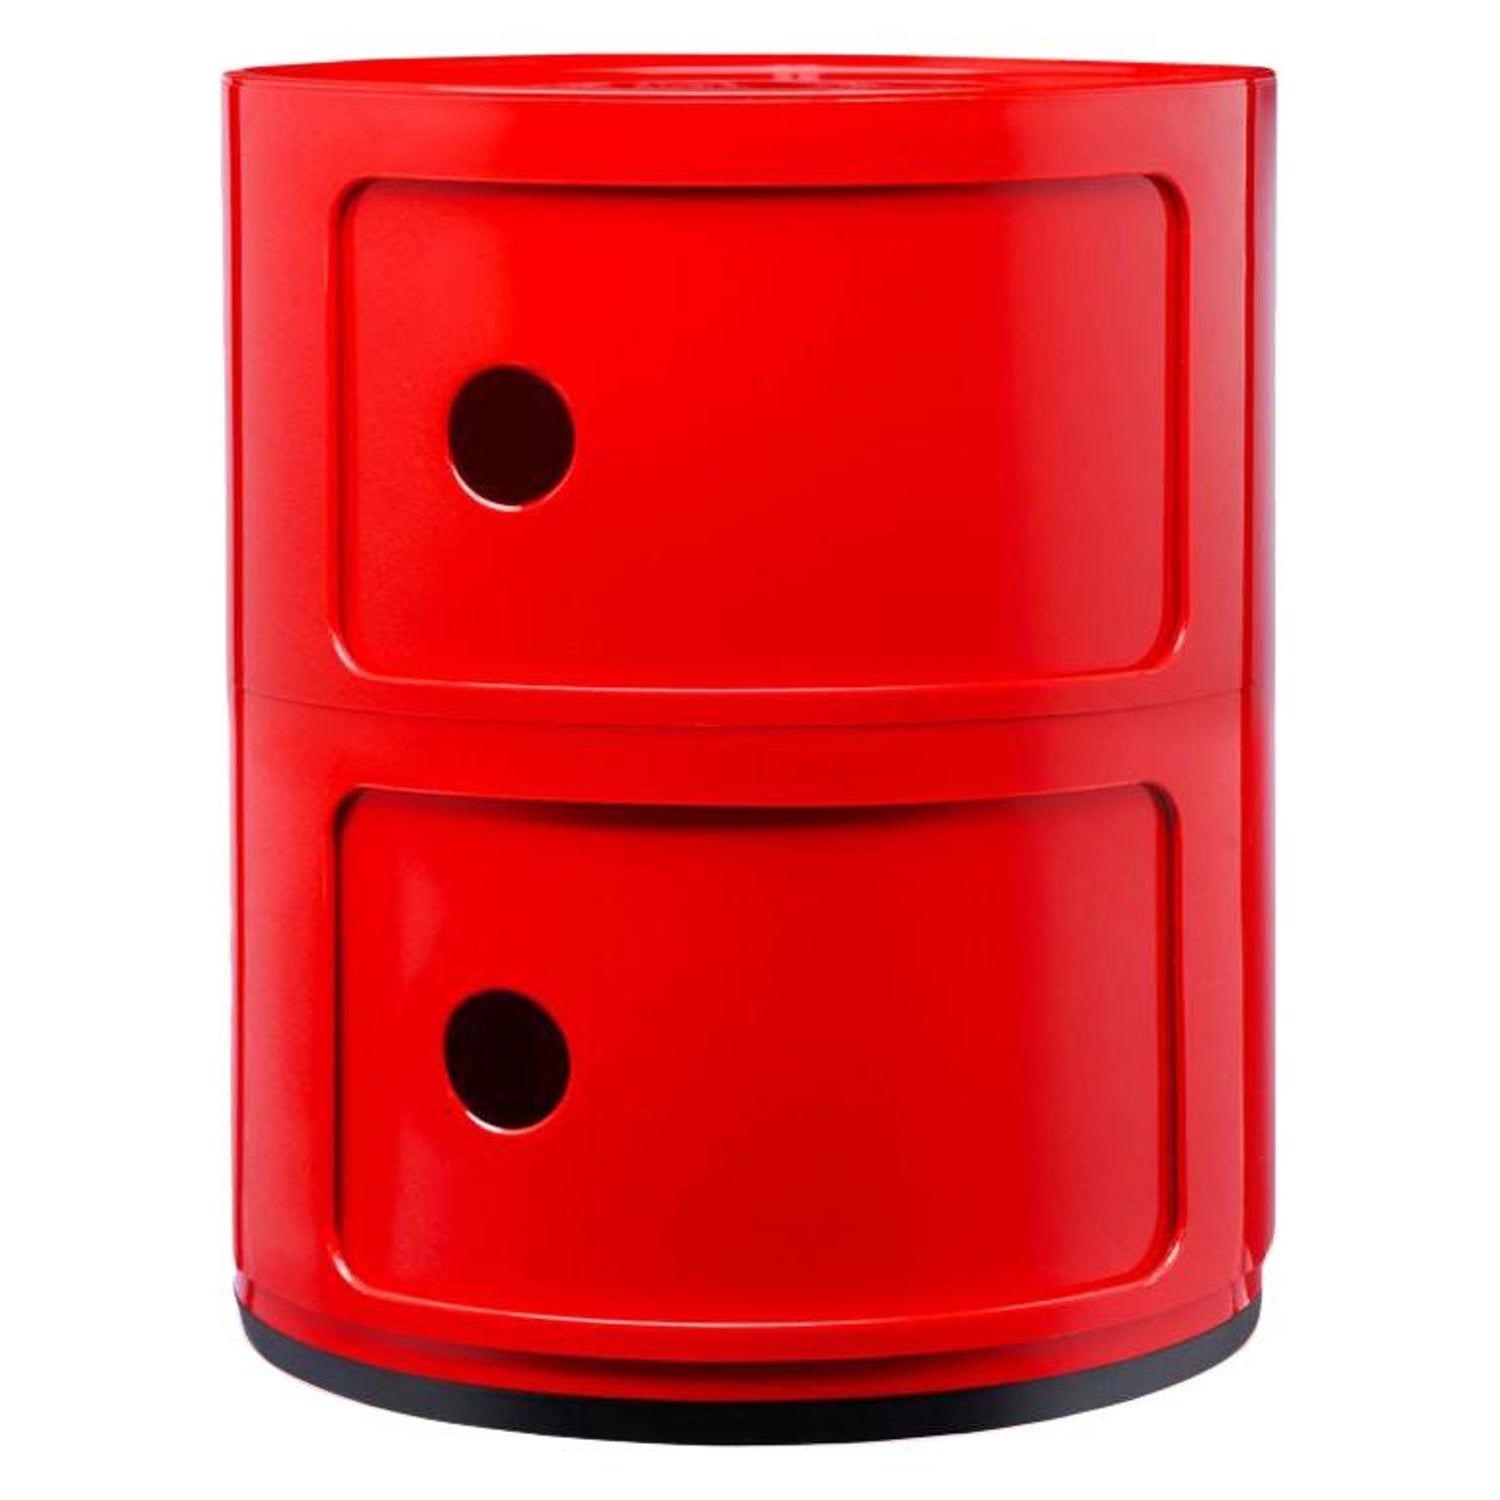 Kartell Componibili 2-Tier Drawer in Smile Red by Anna Castelli Ferrieri  For Sale at 1stDibs | kartell drawers, kartell organizer